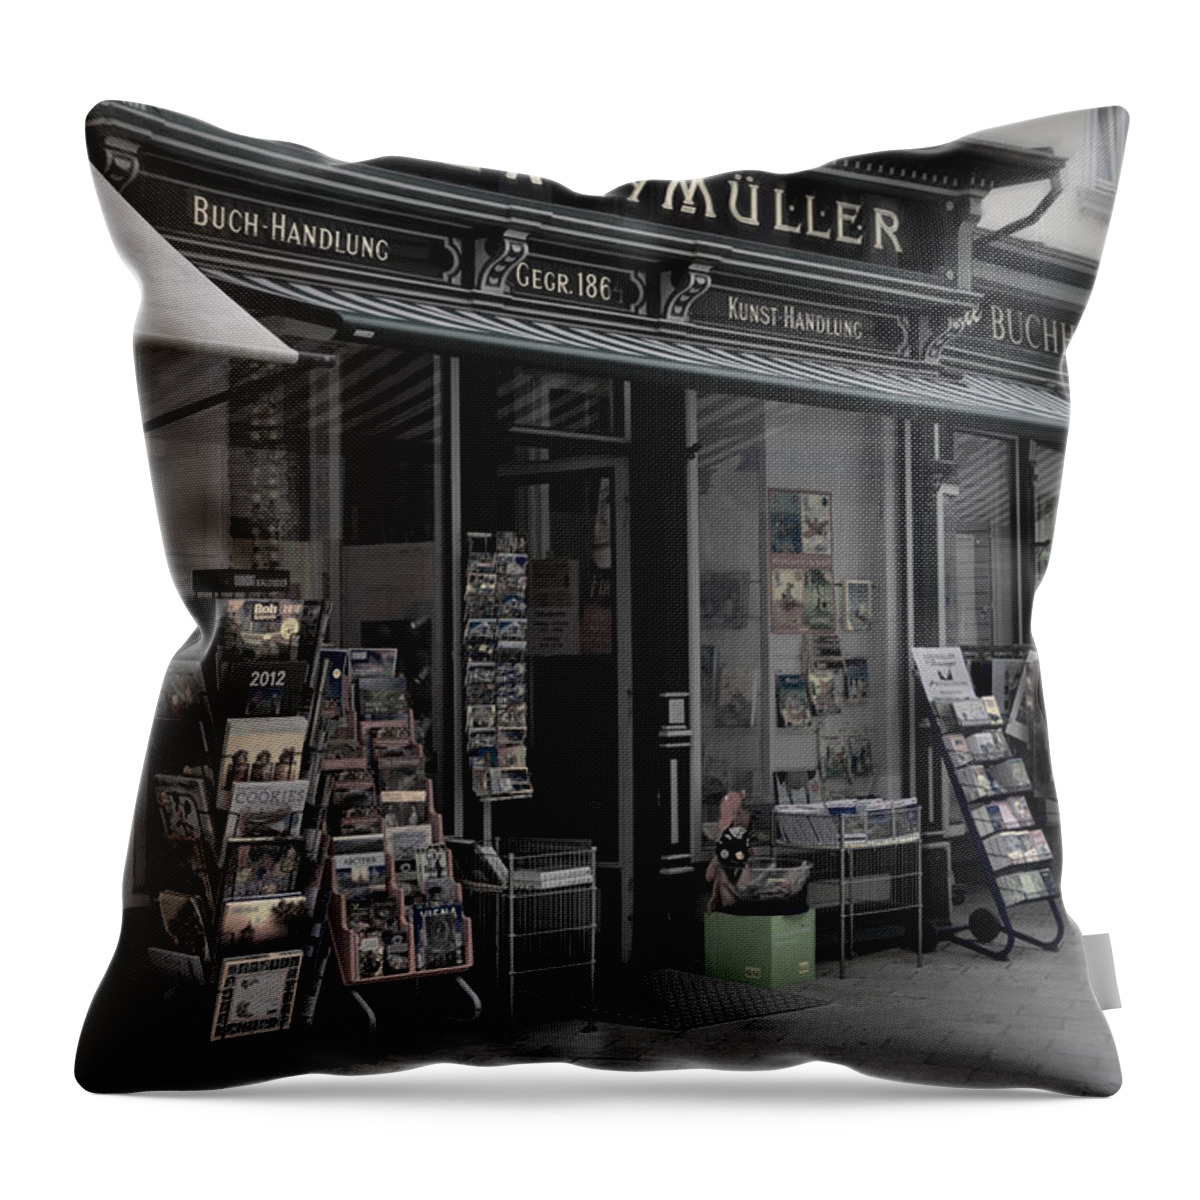 Zweymuller Throw Pillow featuring the photograph The Old Bookstore by Mary Machare